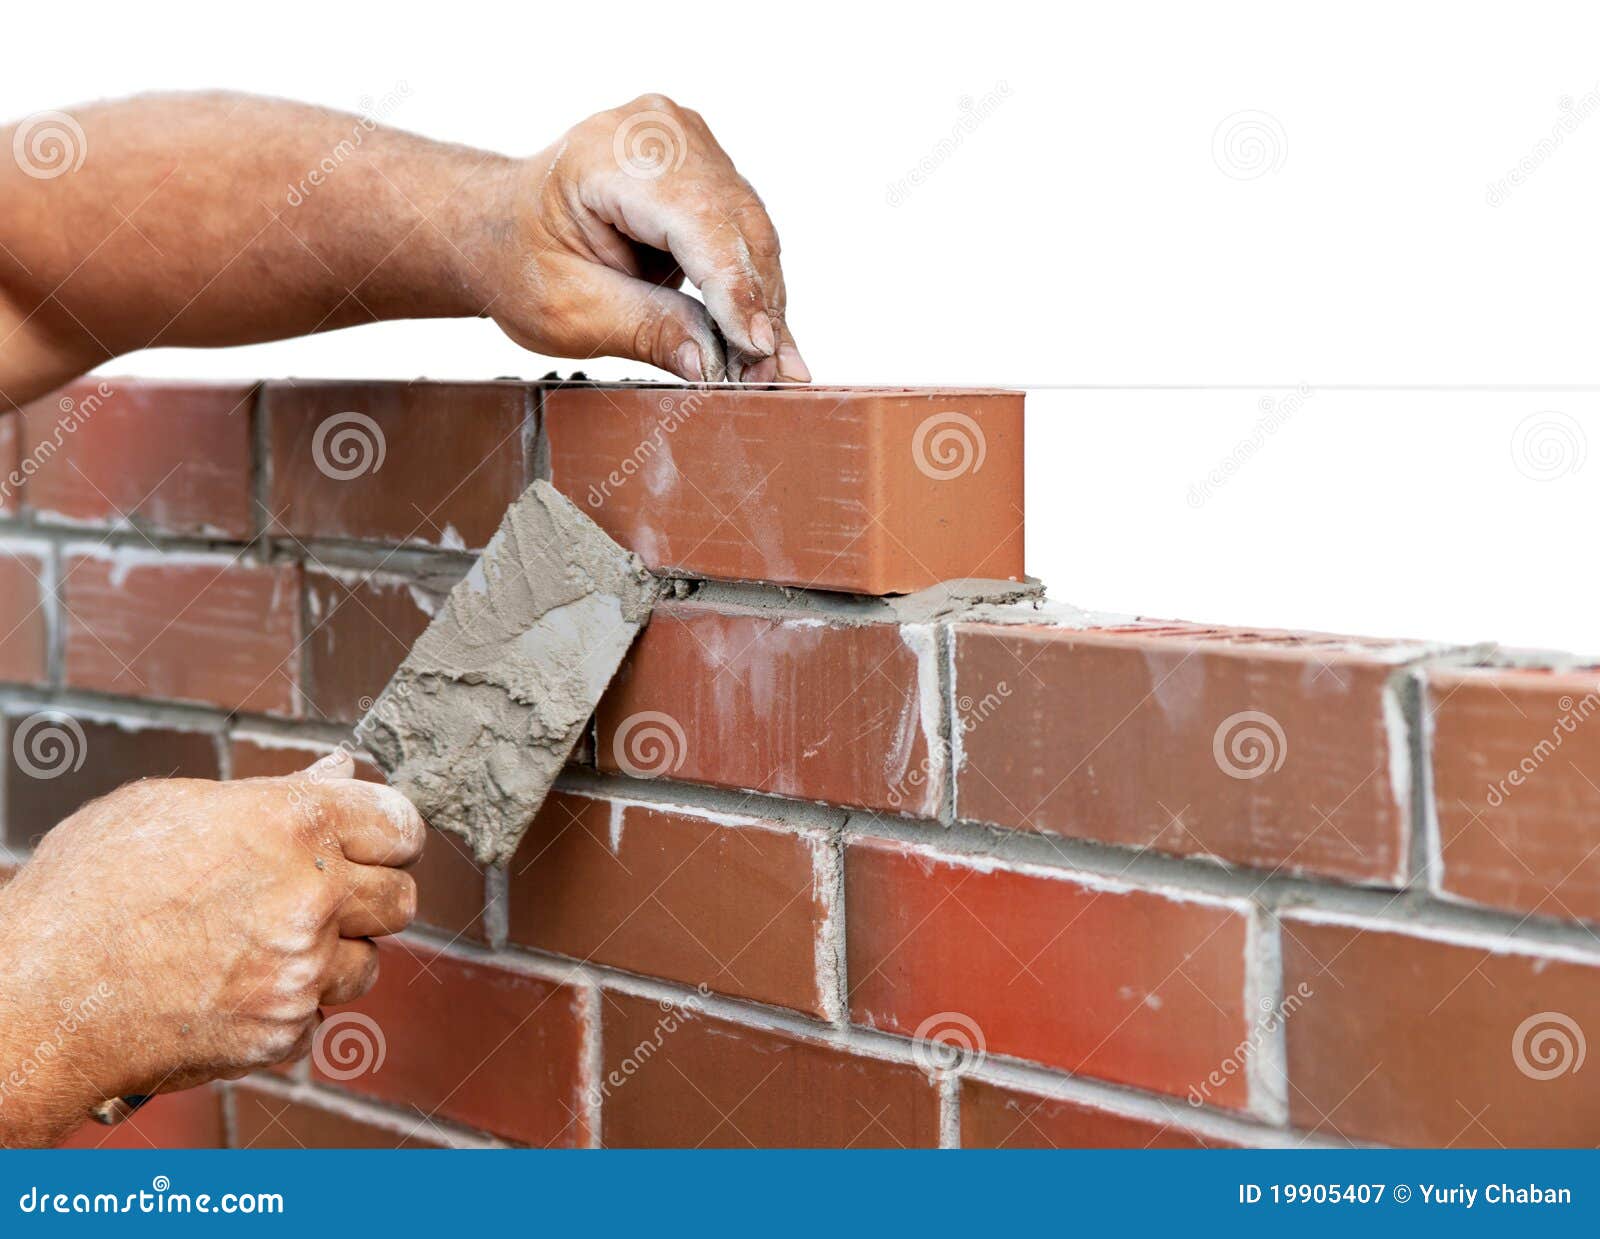 Image result for brick laying